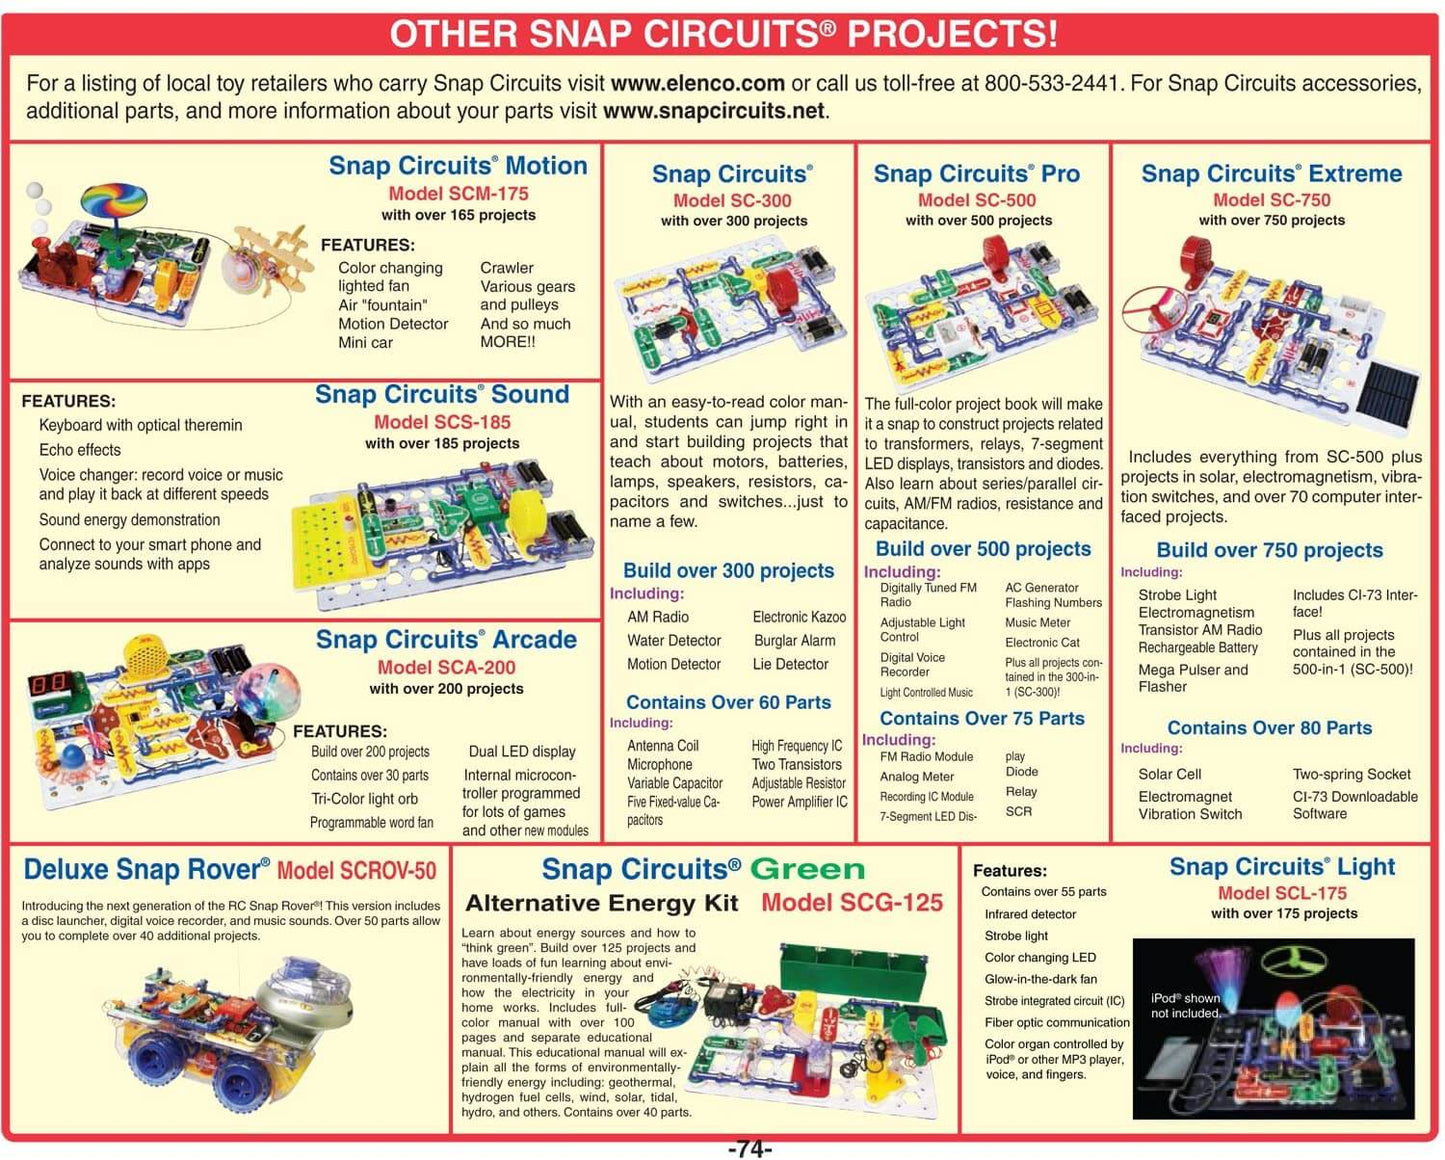 Snap Circuits Arcade, Electronics Exploration Kit, Stem Activities for Ages 8+